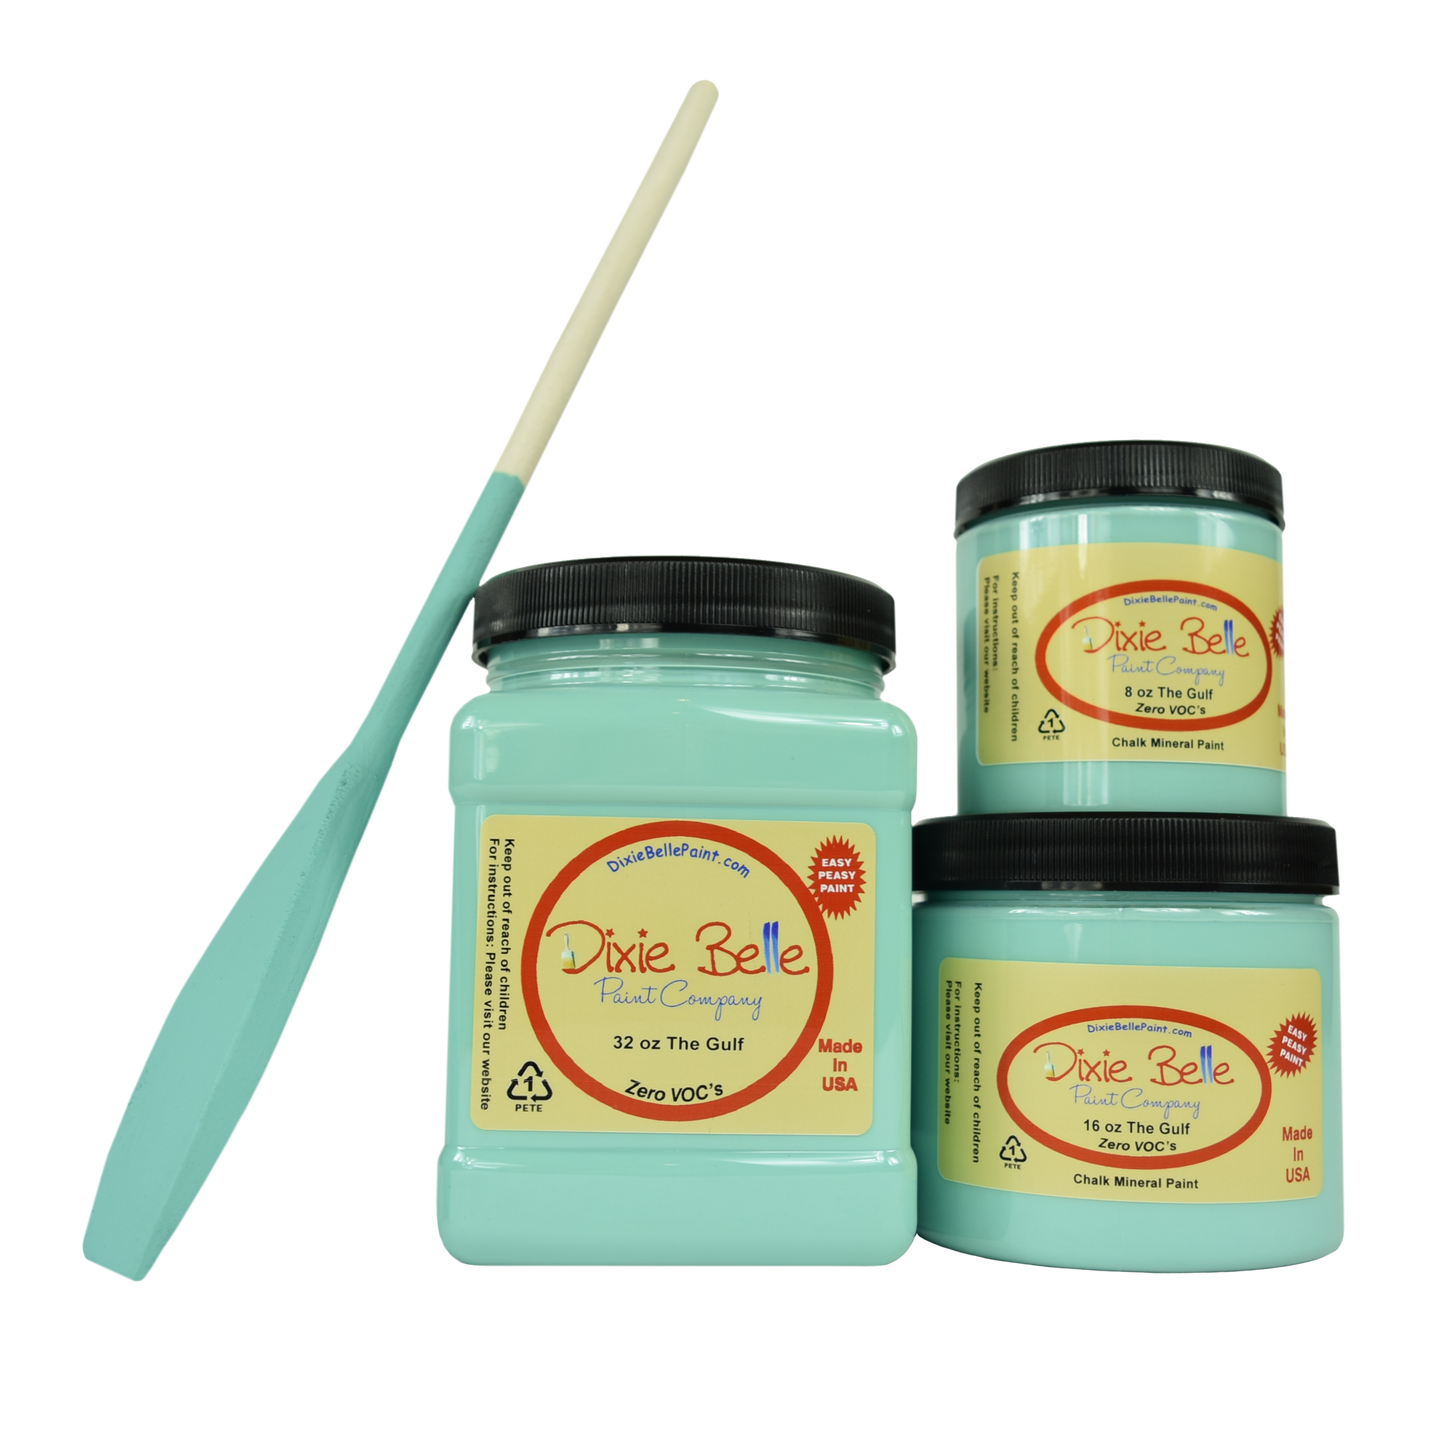 Dixie Belle Chalk Mineral Paint - The Gulf